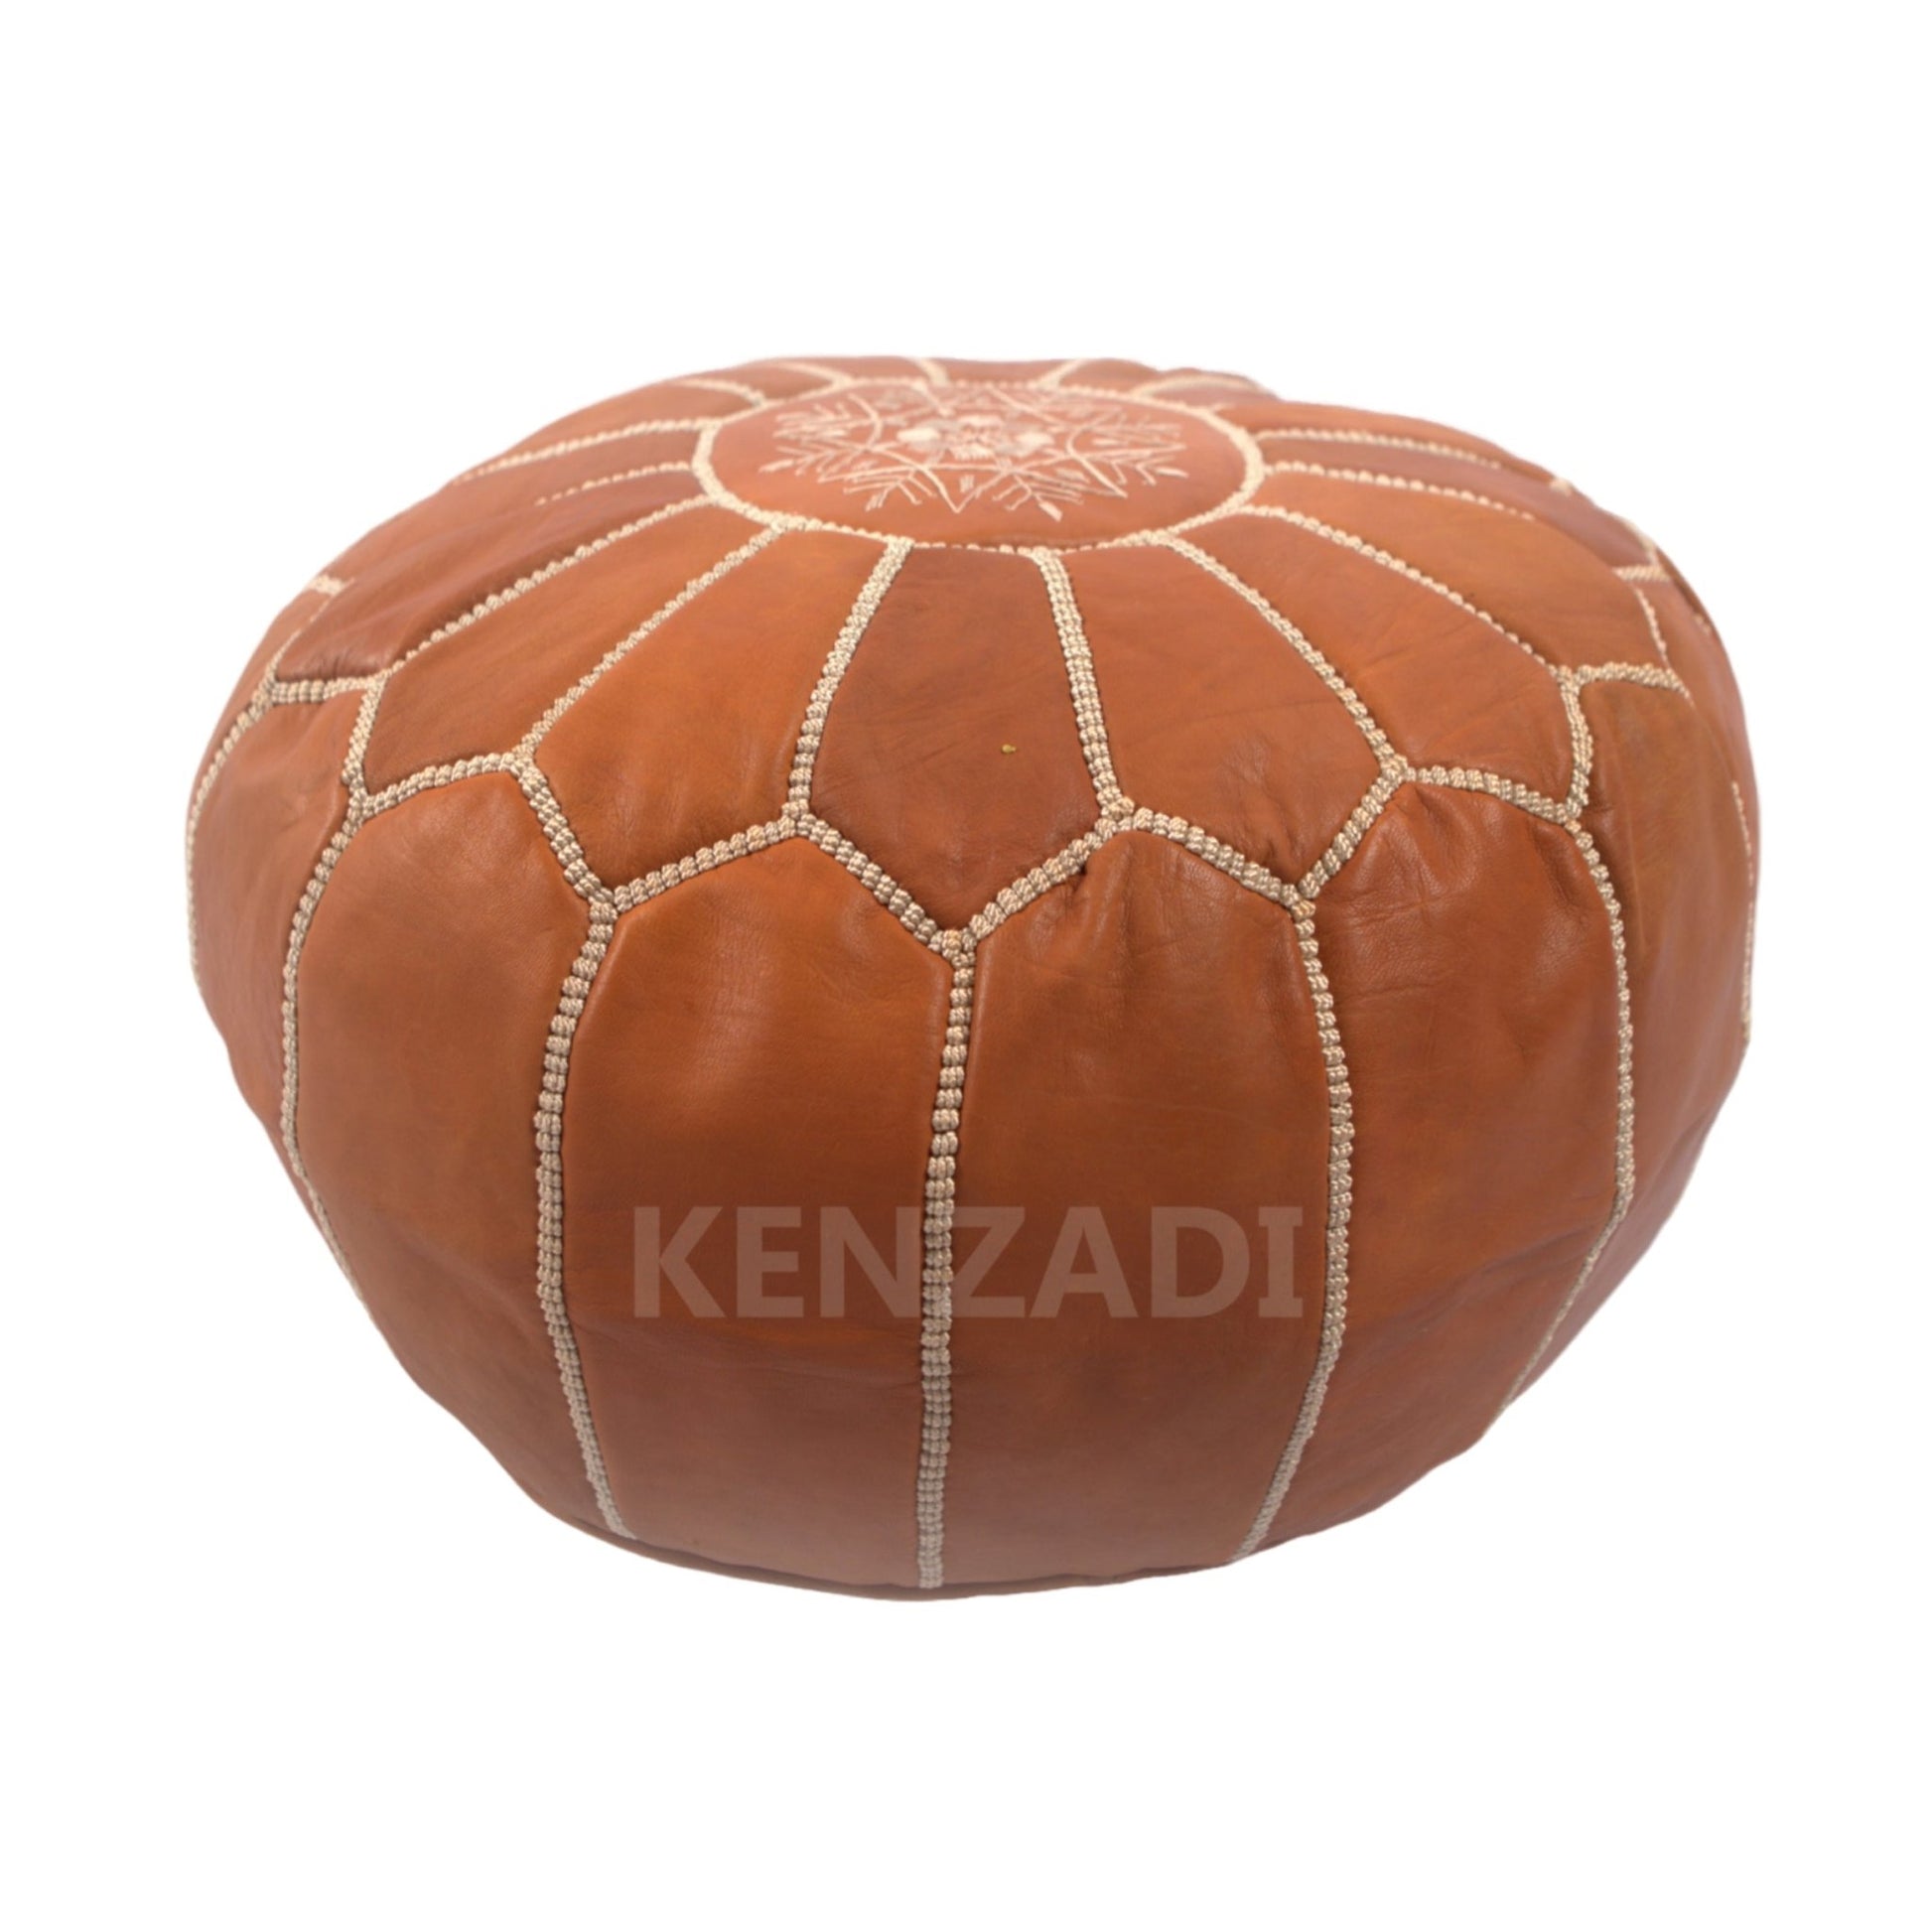 Moroccan leather pouf, round pouf, berber pouf, Light Brown with Beige embroidery by Kenzadi - Handmade by My Poufs